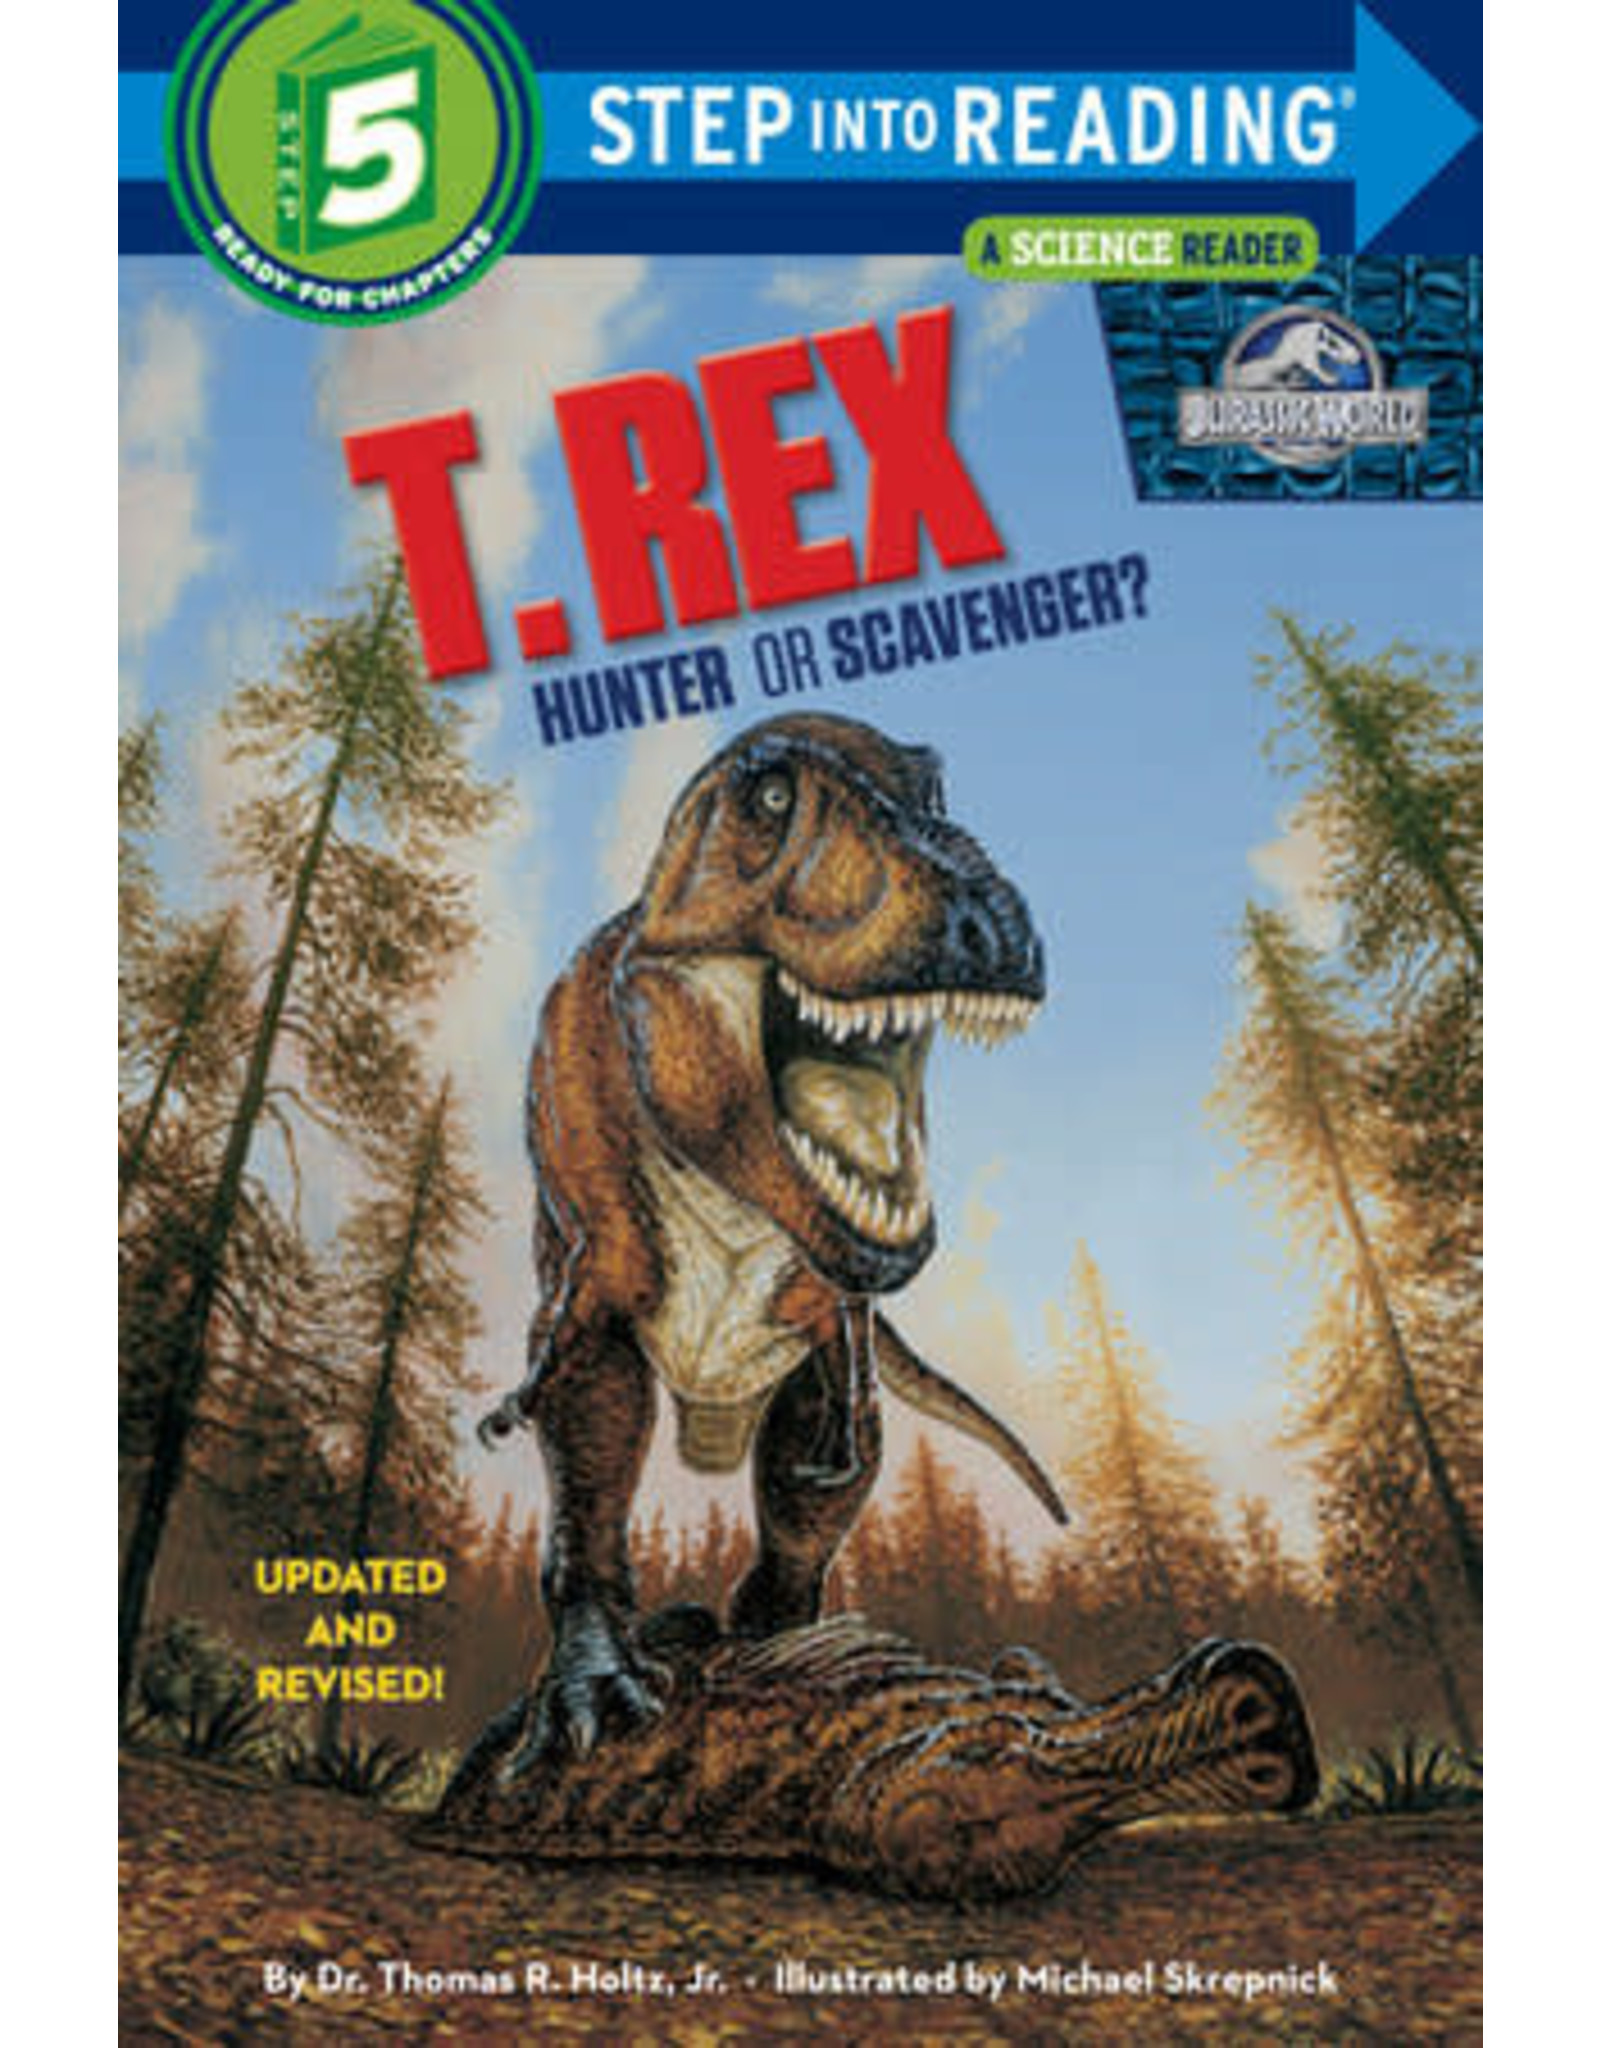 Step Into Reading Step Into Reading - T. Rex: Hunter or Scavenger? (Jurassic World) (Step 5)